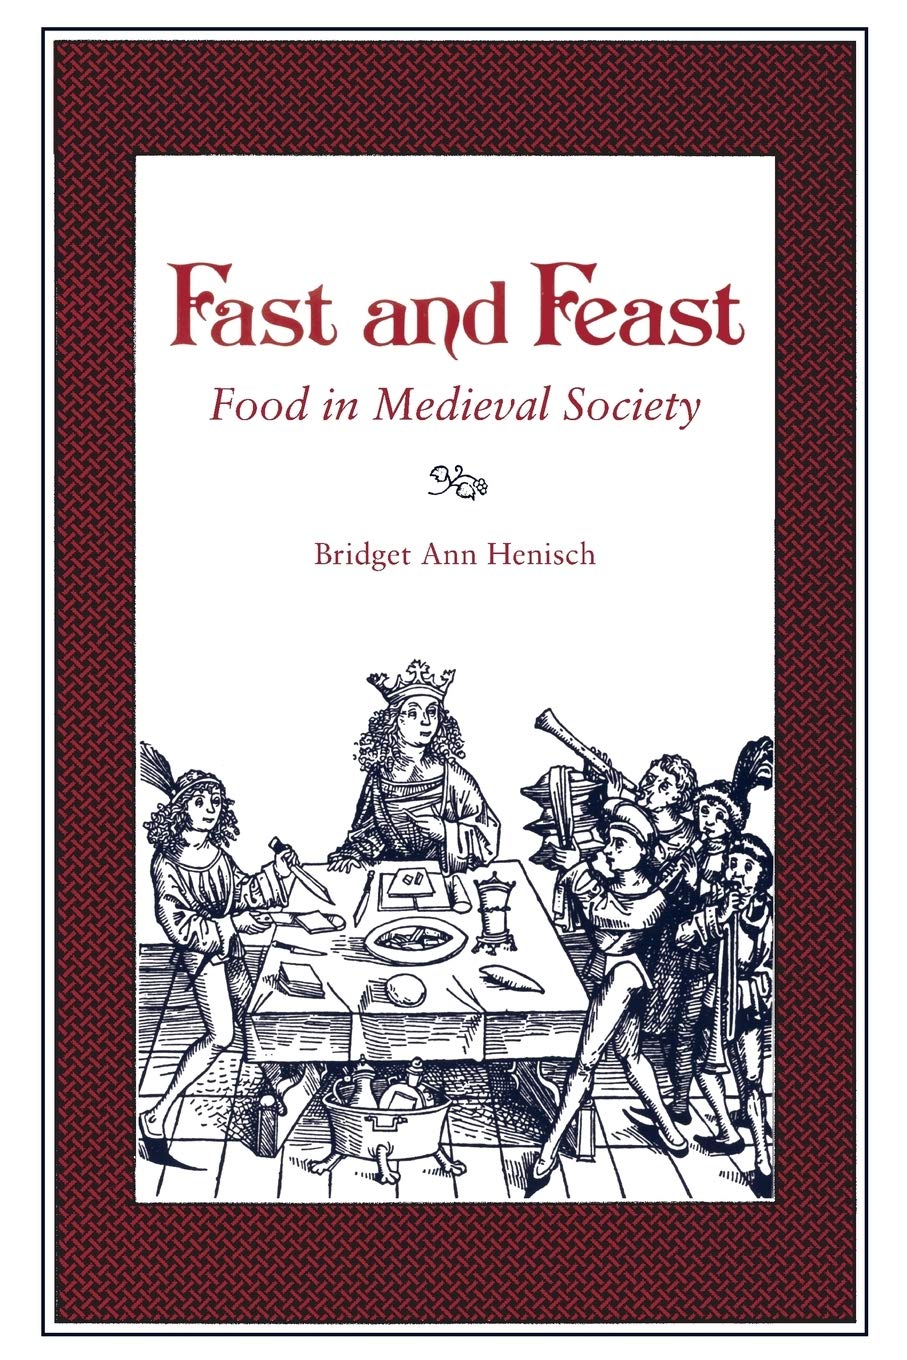 Fast and Feast (Food in Medieval Society) by Bridget Ann Hennish